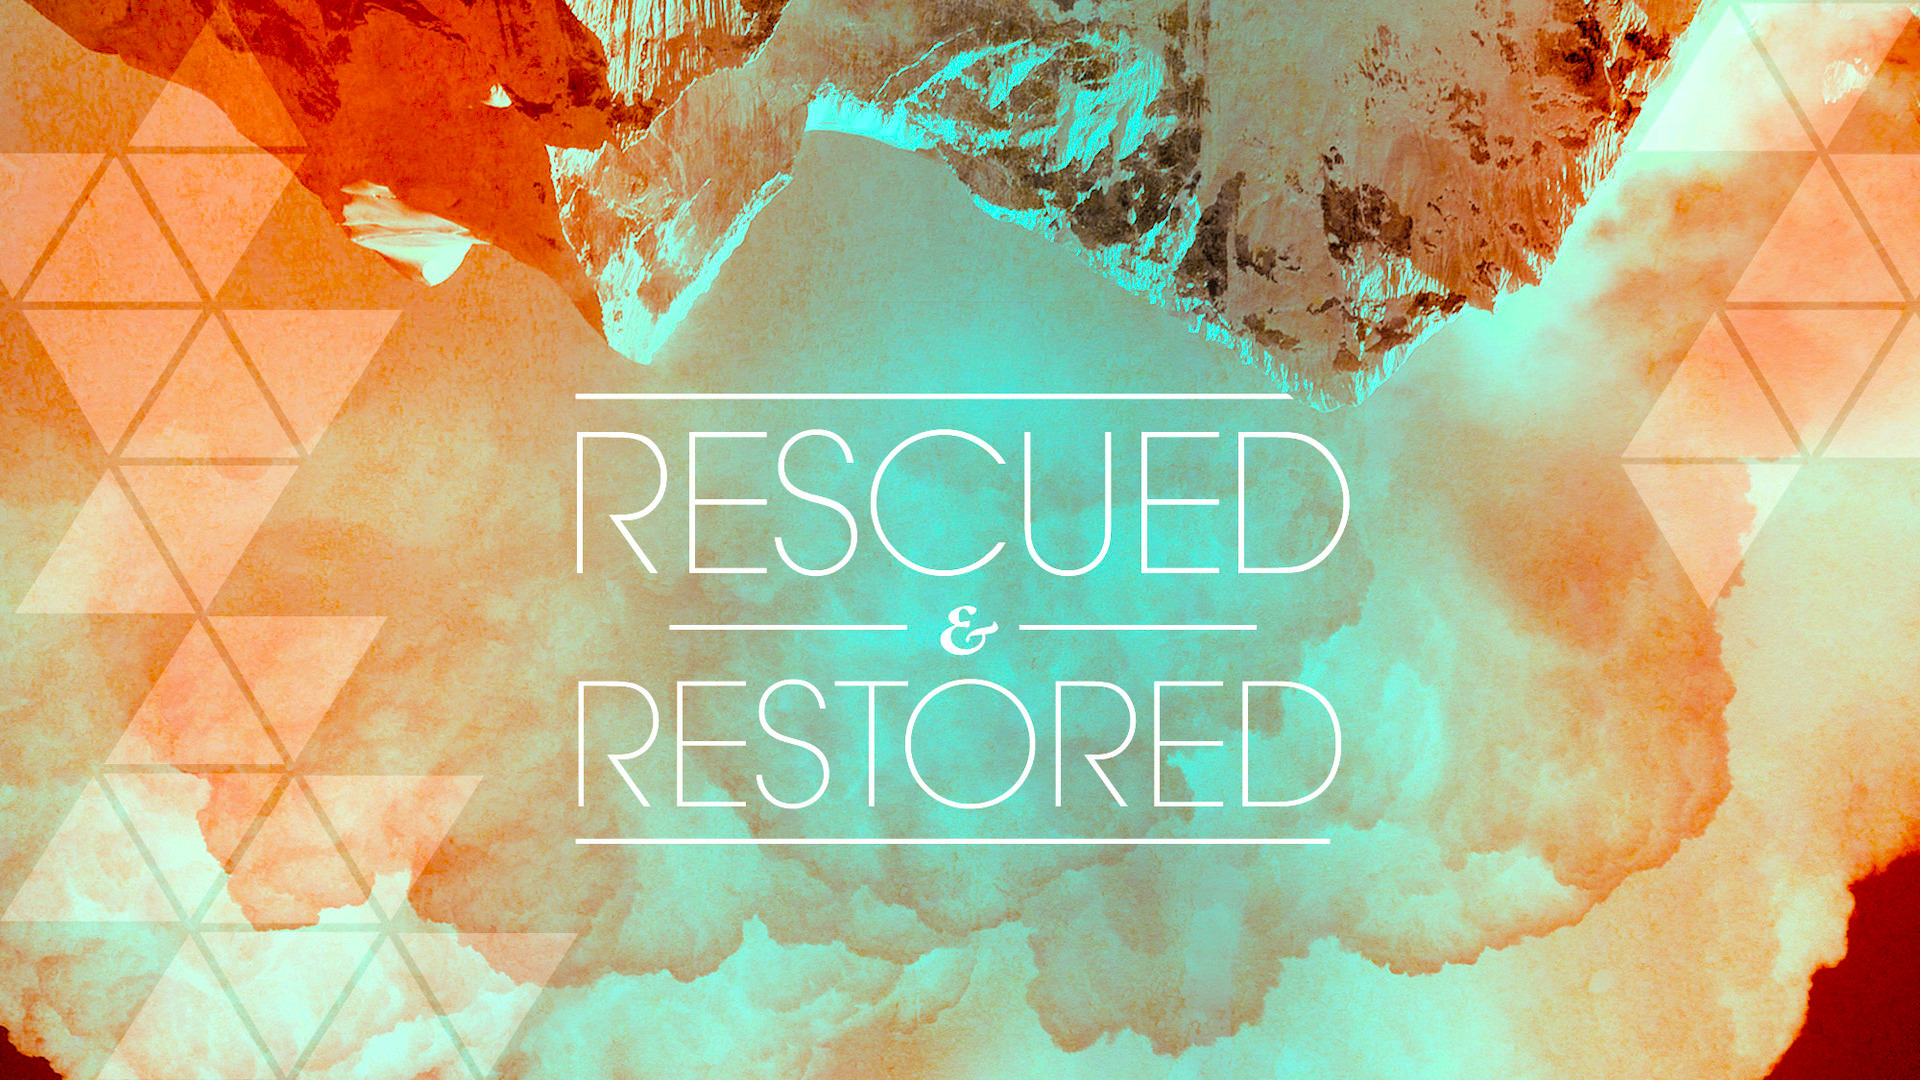 04-24-16 | Rescued & Restored | Has Your Life Been Changed? | Mark Anderson